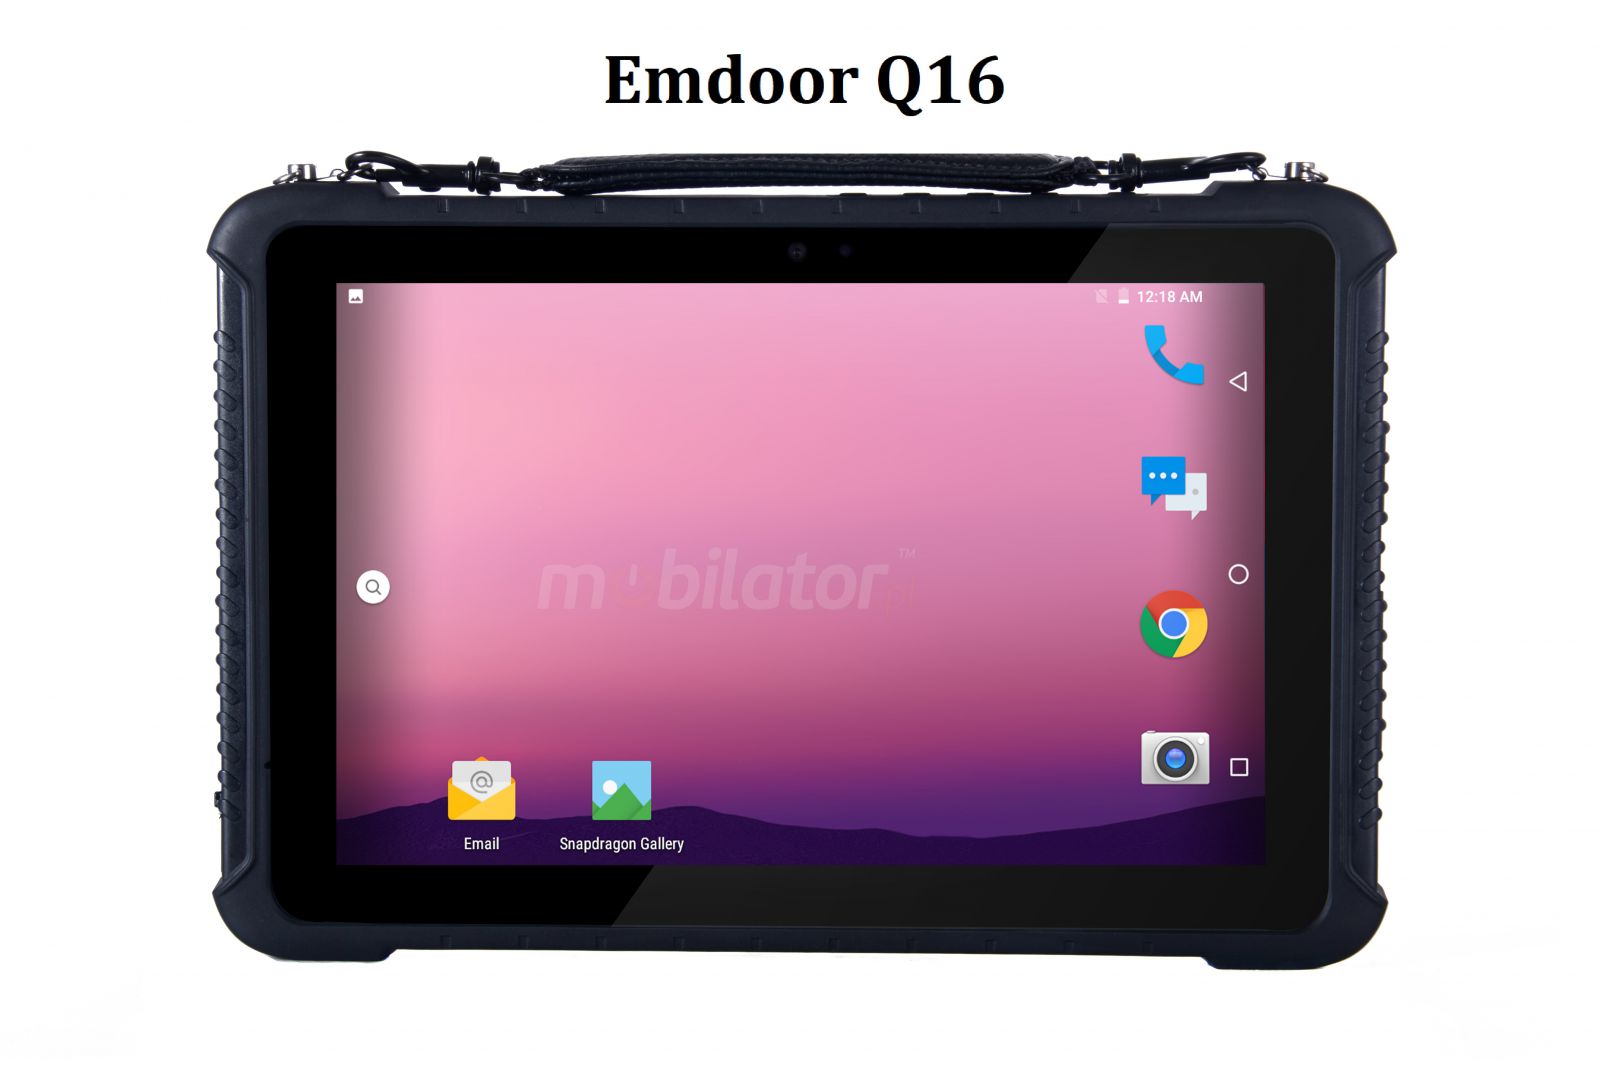 Emdoor Q16 v.5 - waterproof industrial tablet with 4GB RAM, 64GB disk, NFC, AR Film and a 1D Honeywell code scanner 